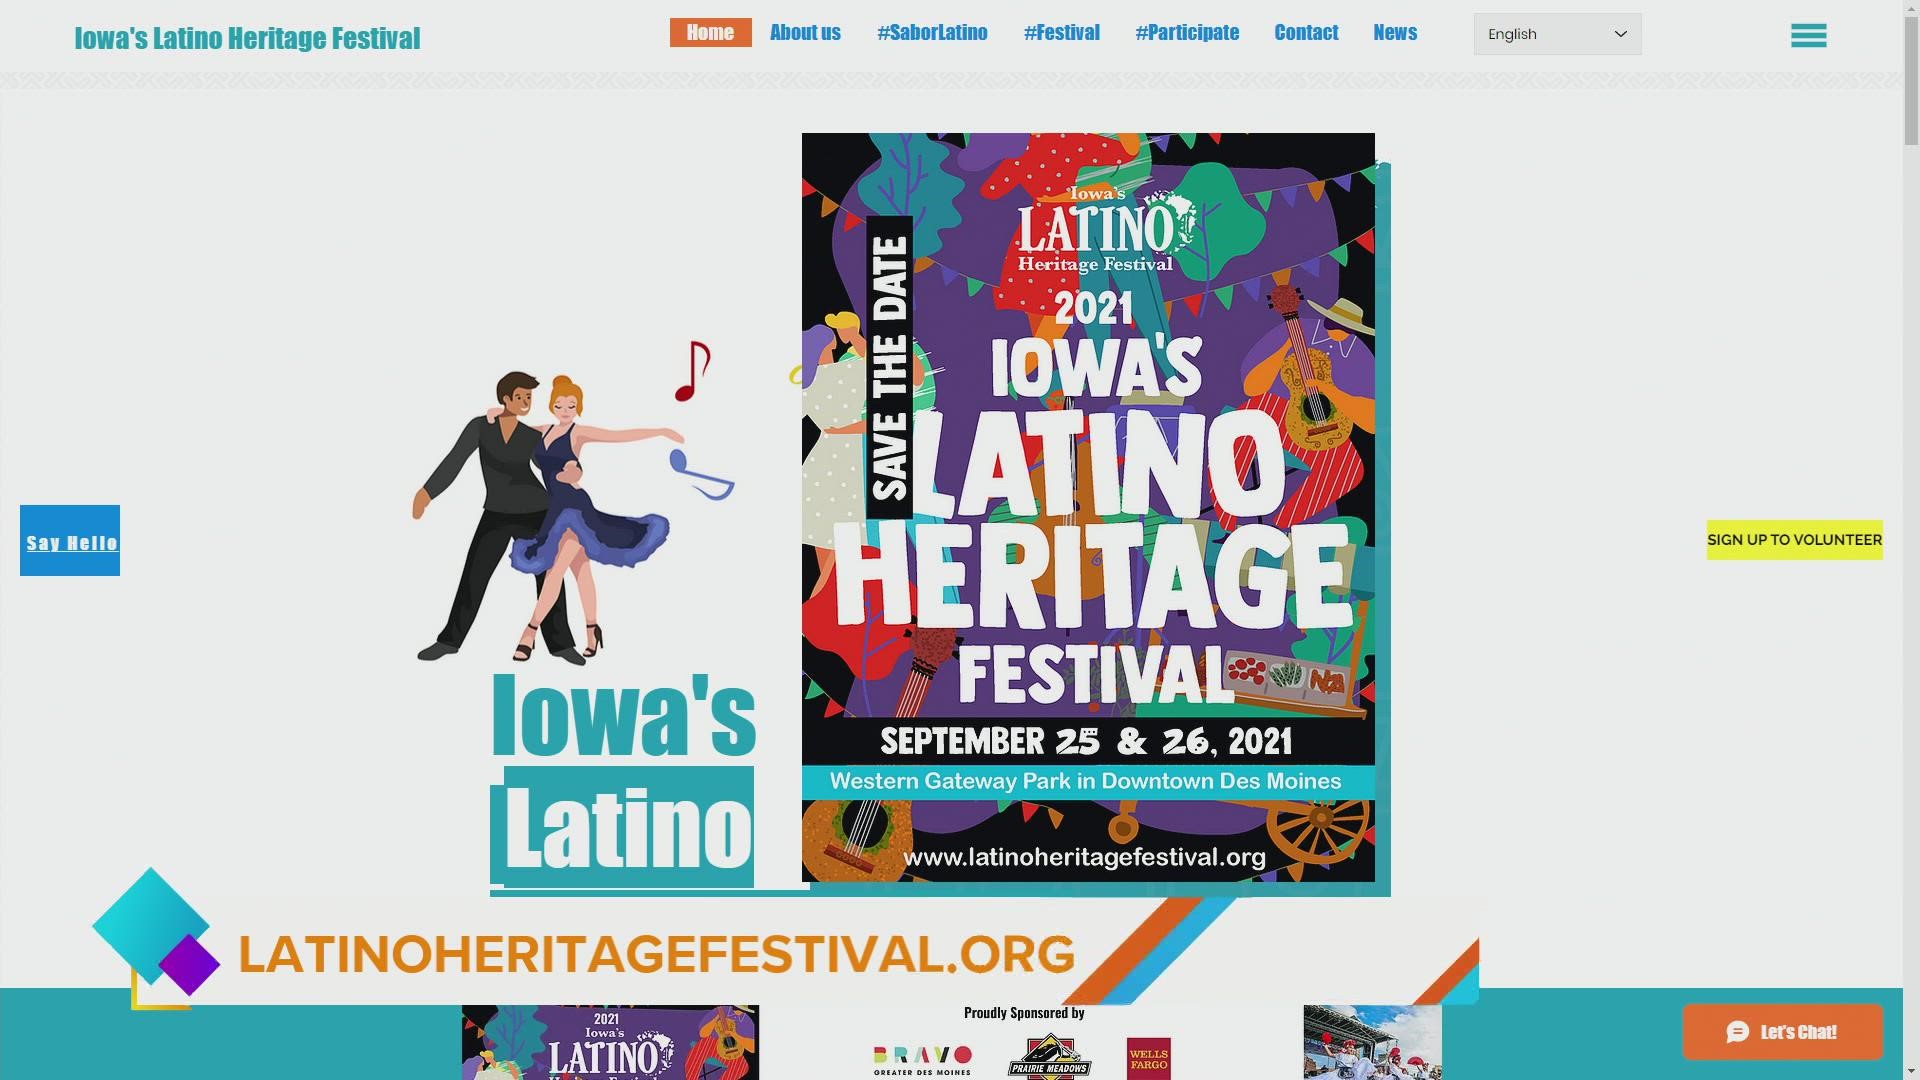 Joe Gonzalez, Executive Director of Latino Resources Inc., has details on Iowa's Latino Heritage Festival happening September 25-26, 2021 in Western Gateway Park